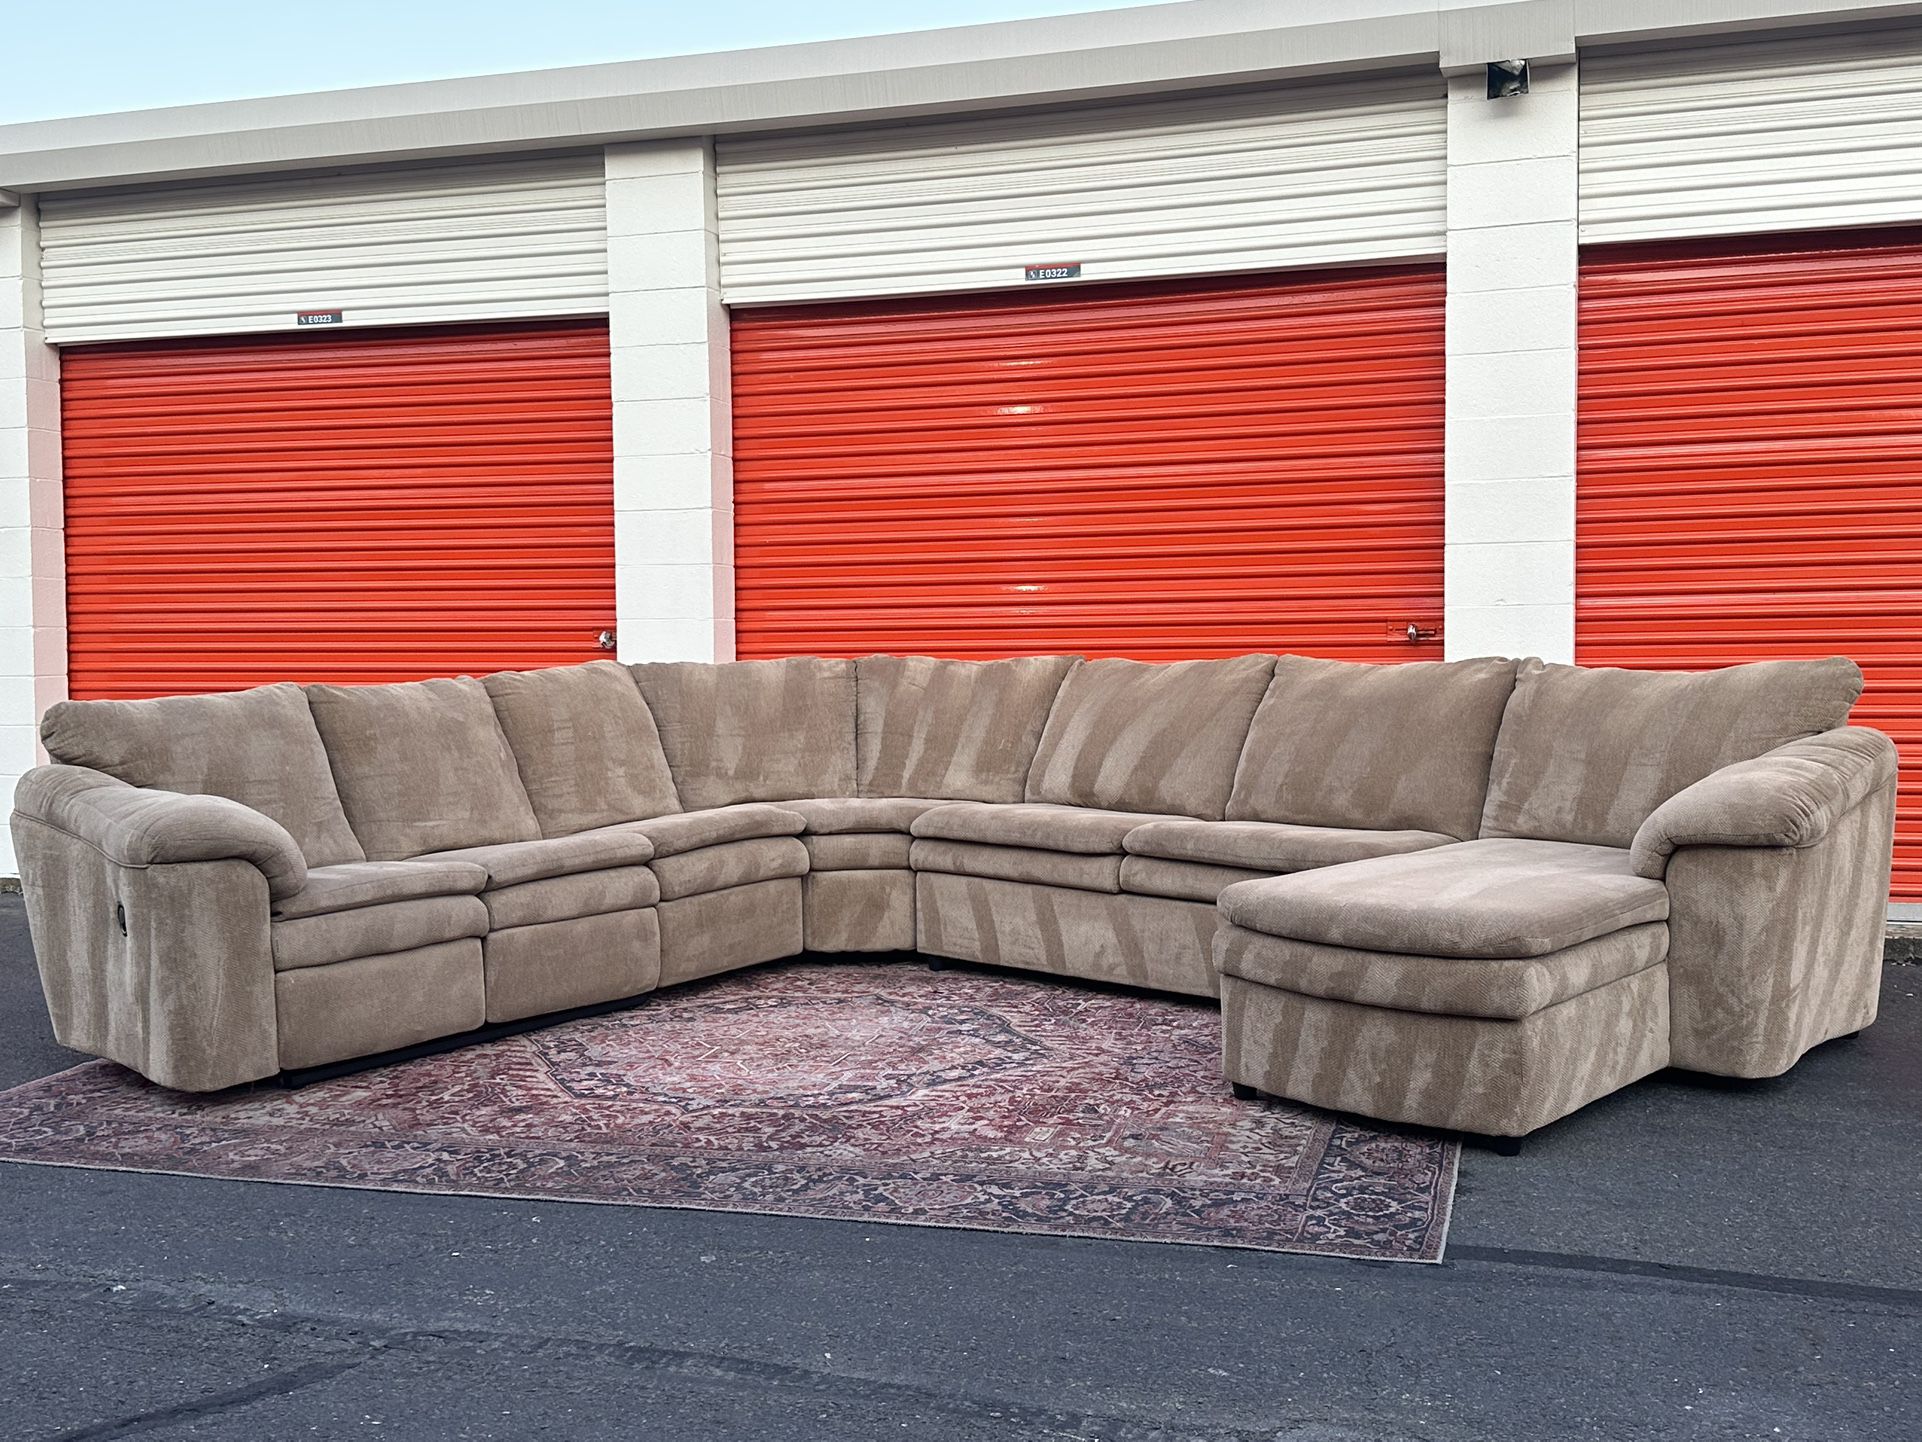 Ashley’s Recliner Sectional Couch Set Free Curbside Delivery 